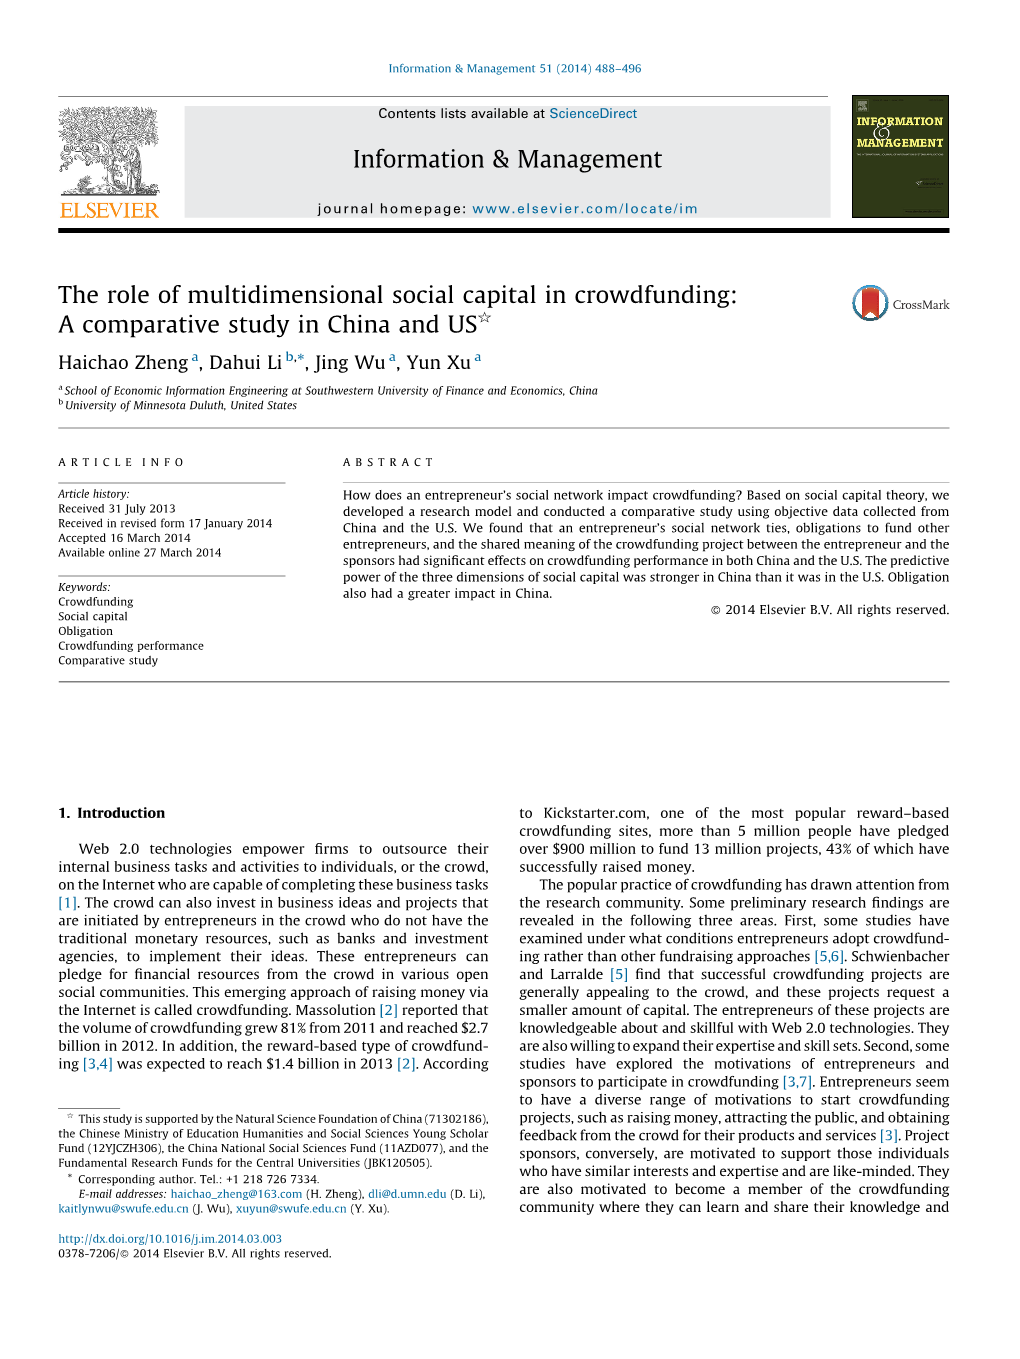 The Role of Multidimensional Social Capital in Crowdfunding: A